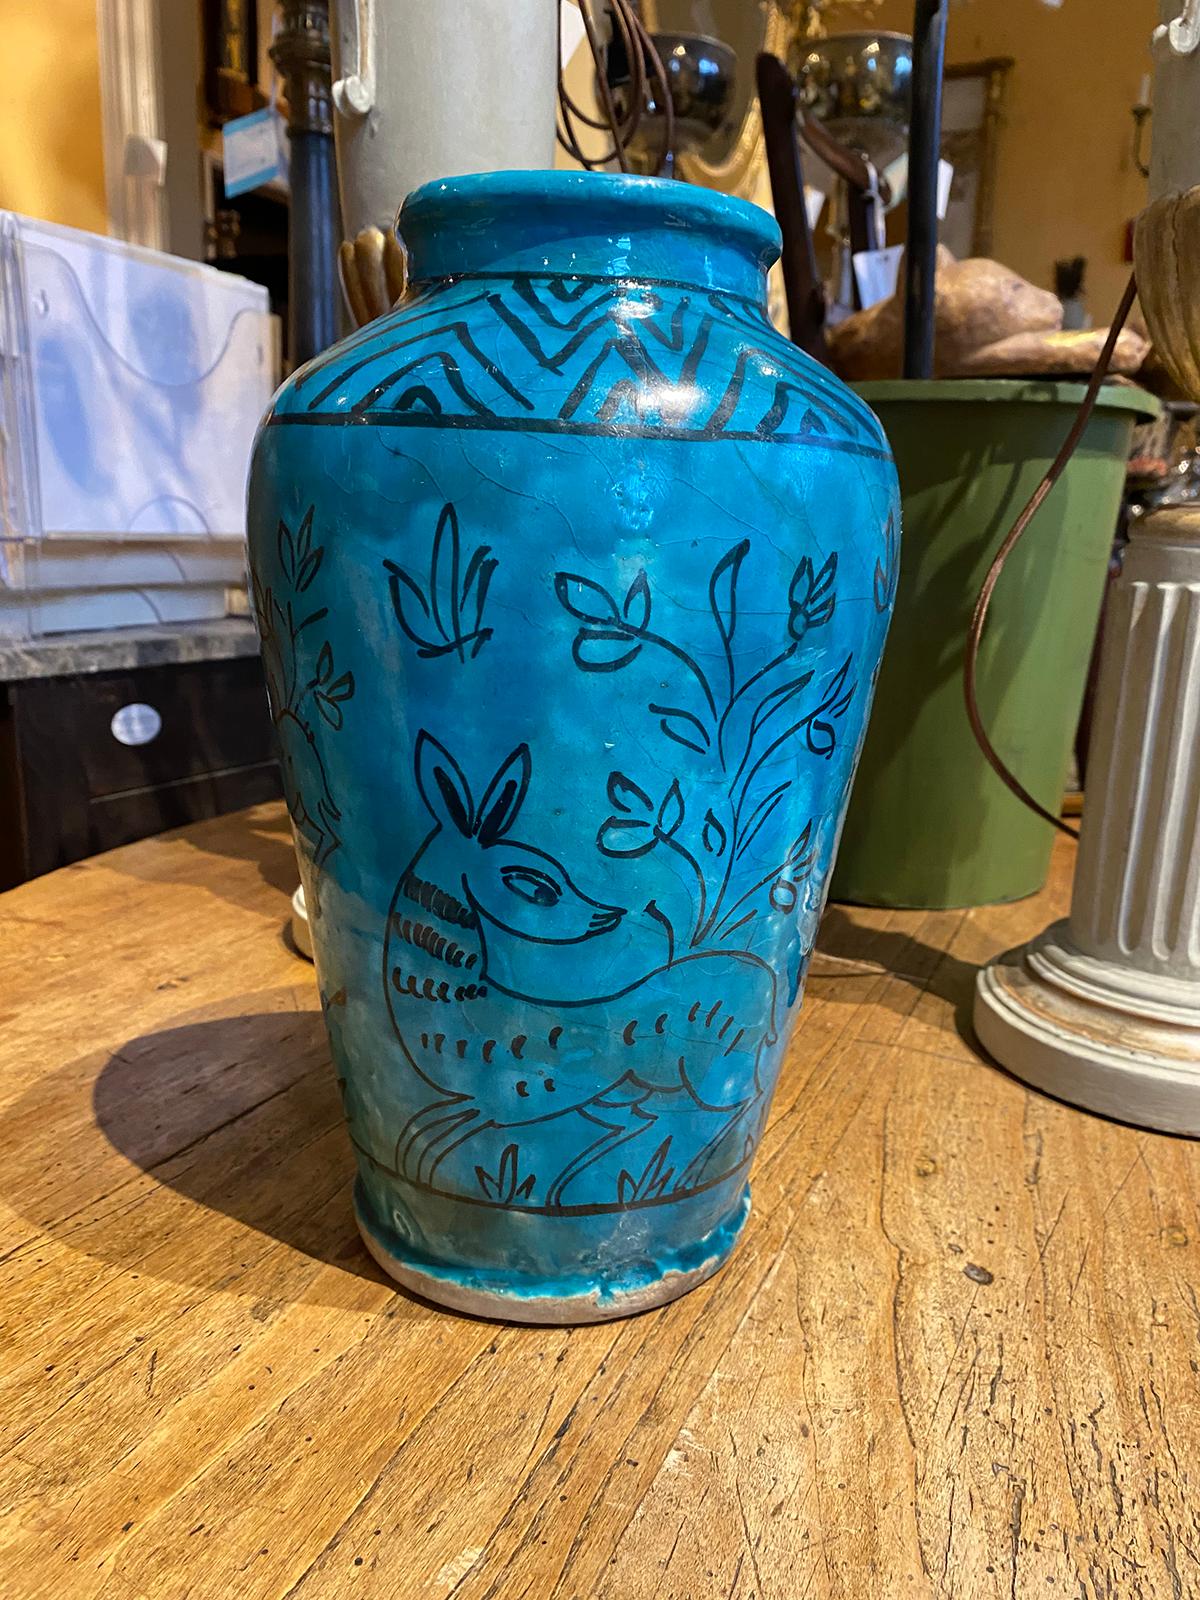 19th-20th century Persian blue glazed pottery jar/vase decorated with does.